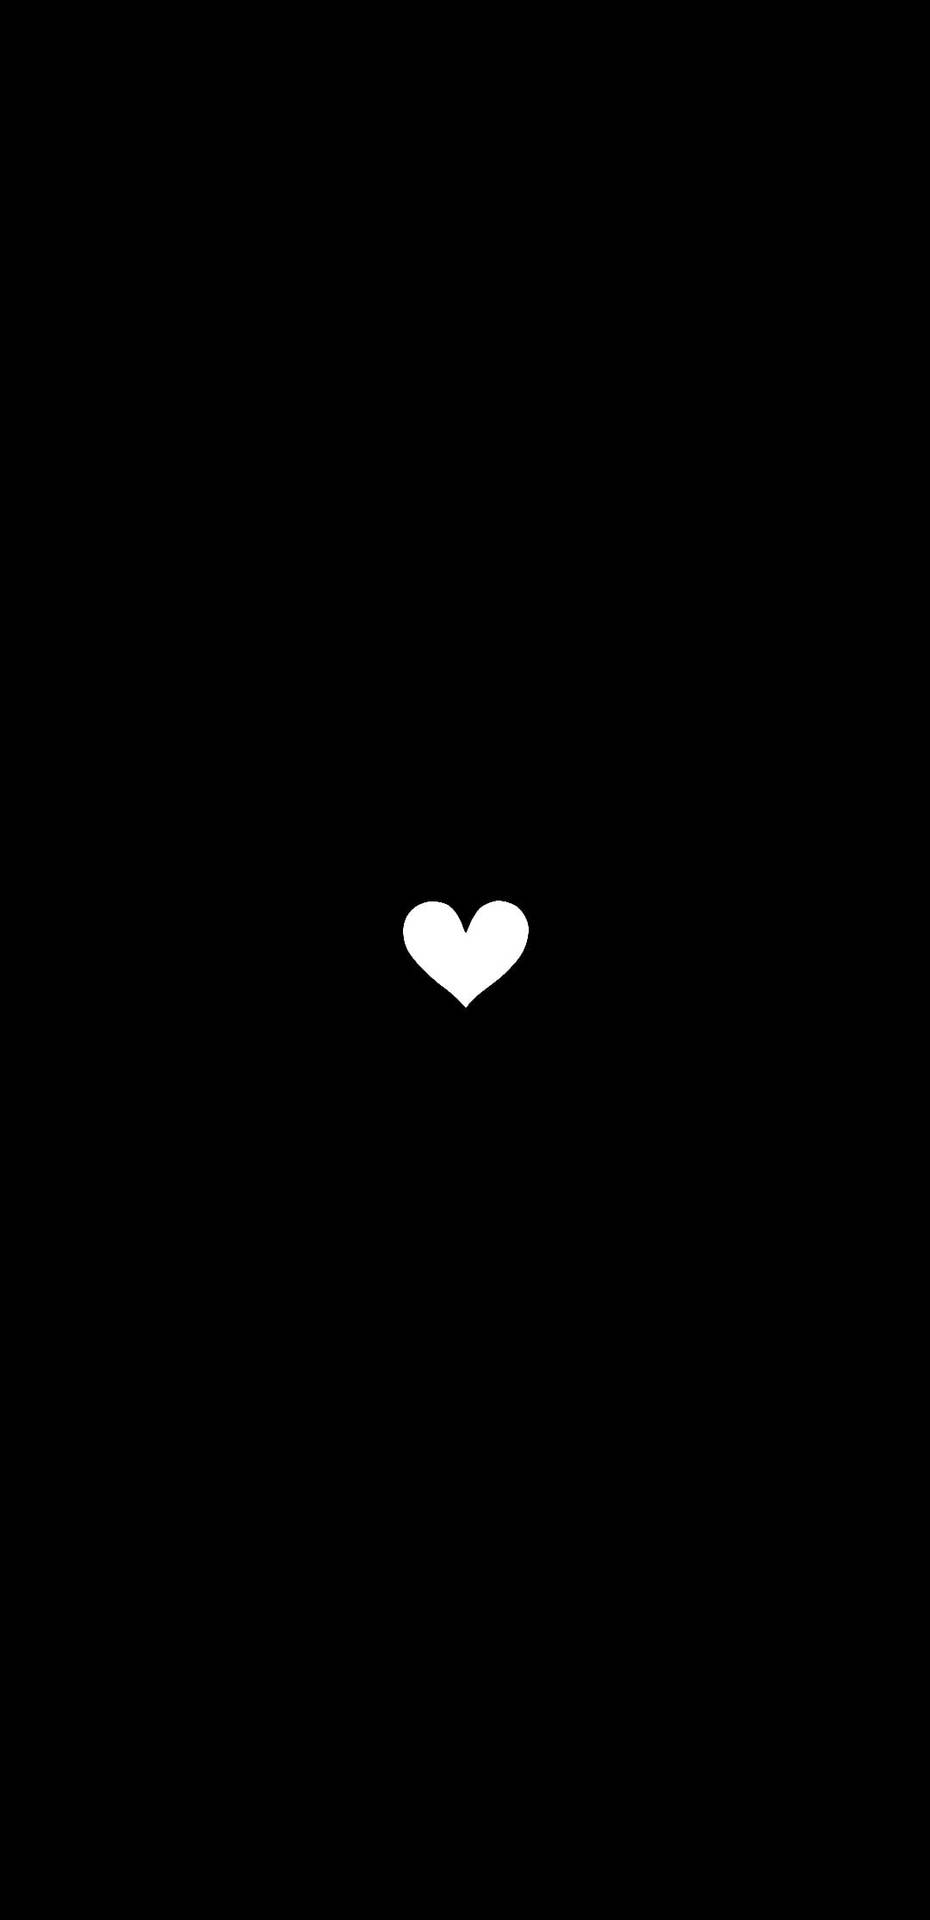 Small Black And White Heart Background